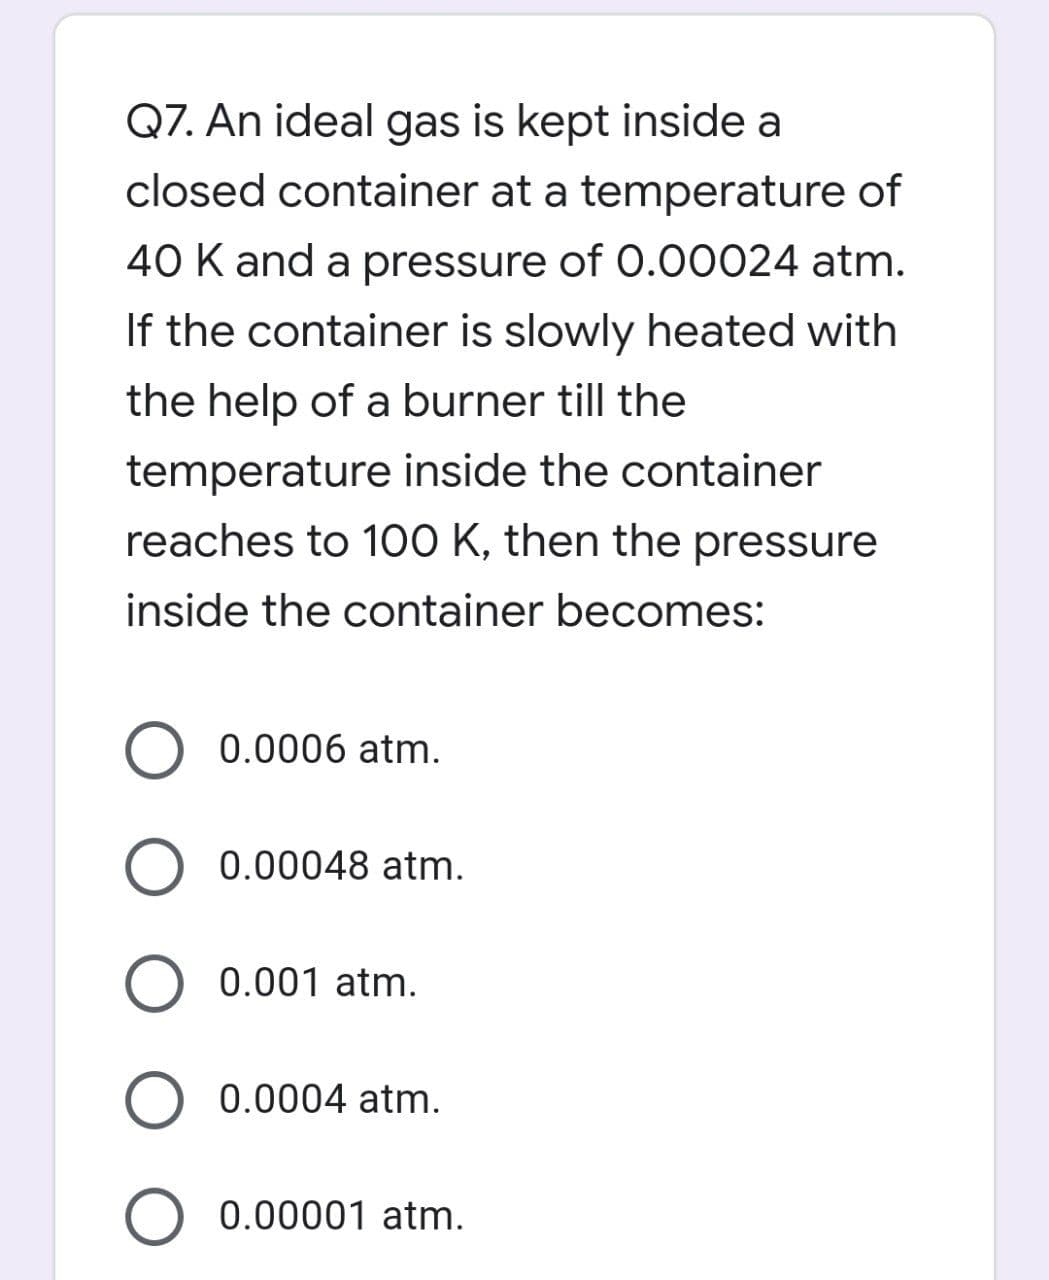 Q7. An ideal gas is kept inside a
closed container at a temperature of
40 K and a pressure of 0.00024 atm.
If the container is slowly heated with
the help of a burner till the
temperature inside the container
reaches to 100 K, then the pressure
inside the container becomes:
O 0.0006 atm.
0.00048 atm.
O 0.001 atm.
O 0.0004 atm.
0.00001 atm.